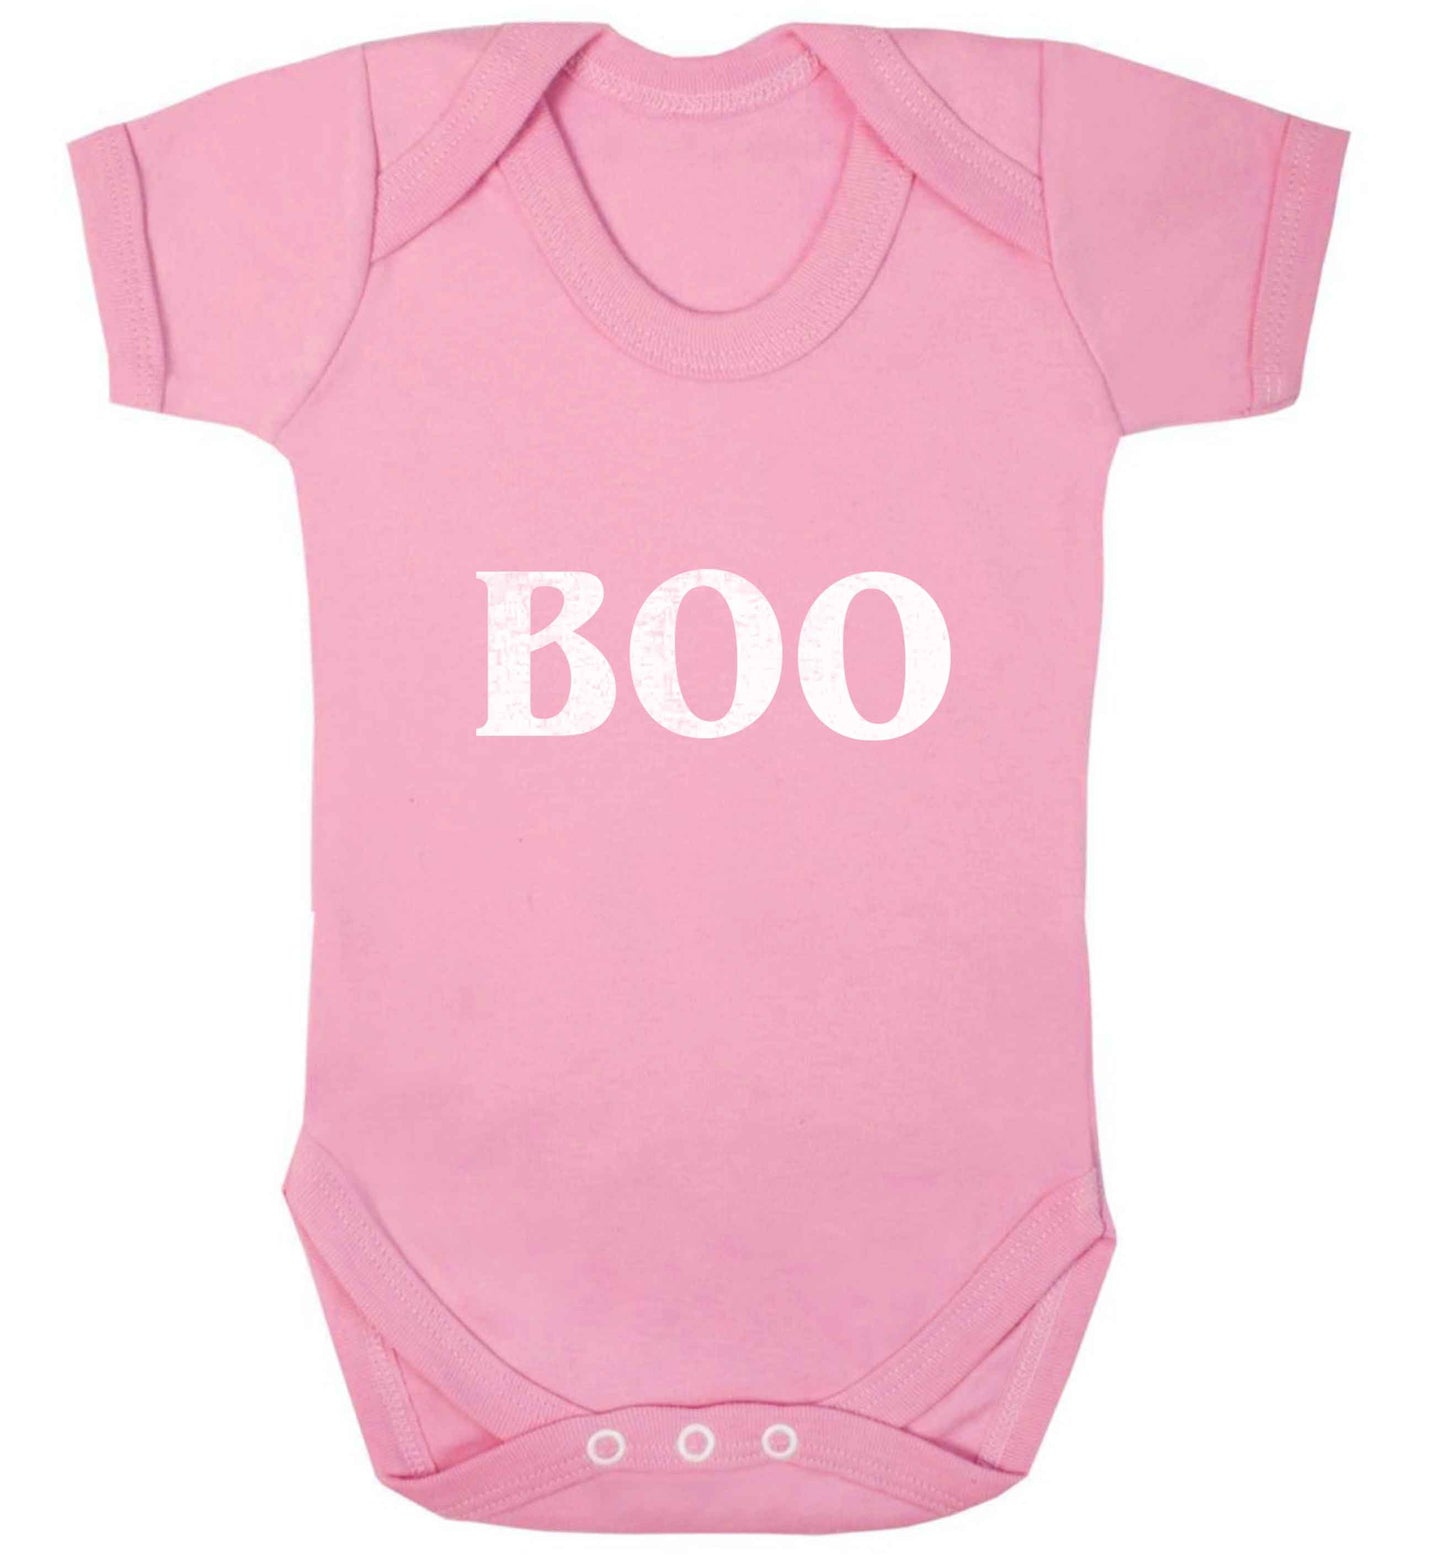 Boo baby vest pale pink 18-24 months